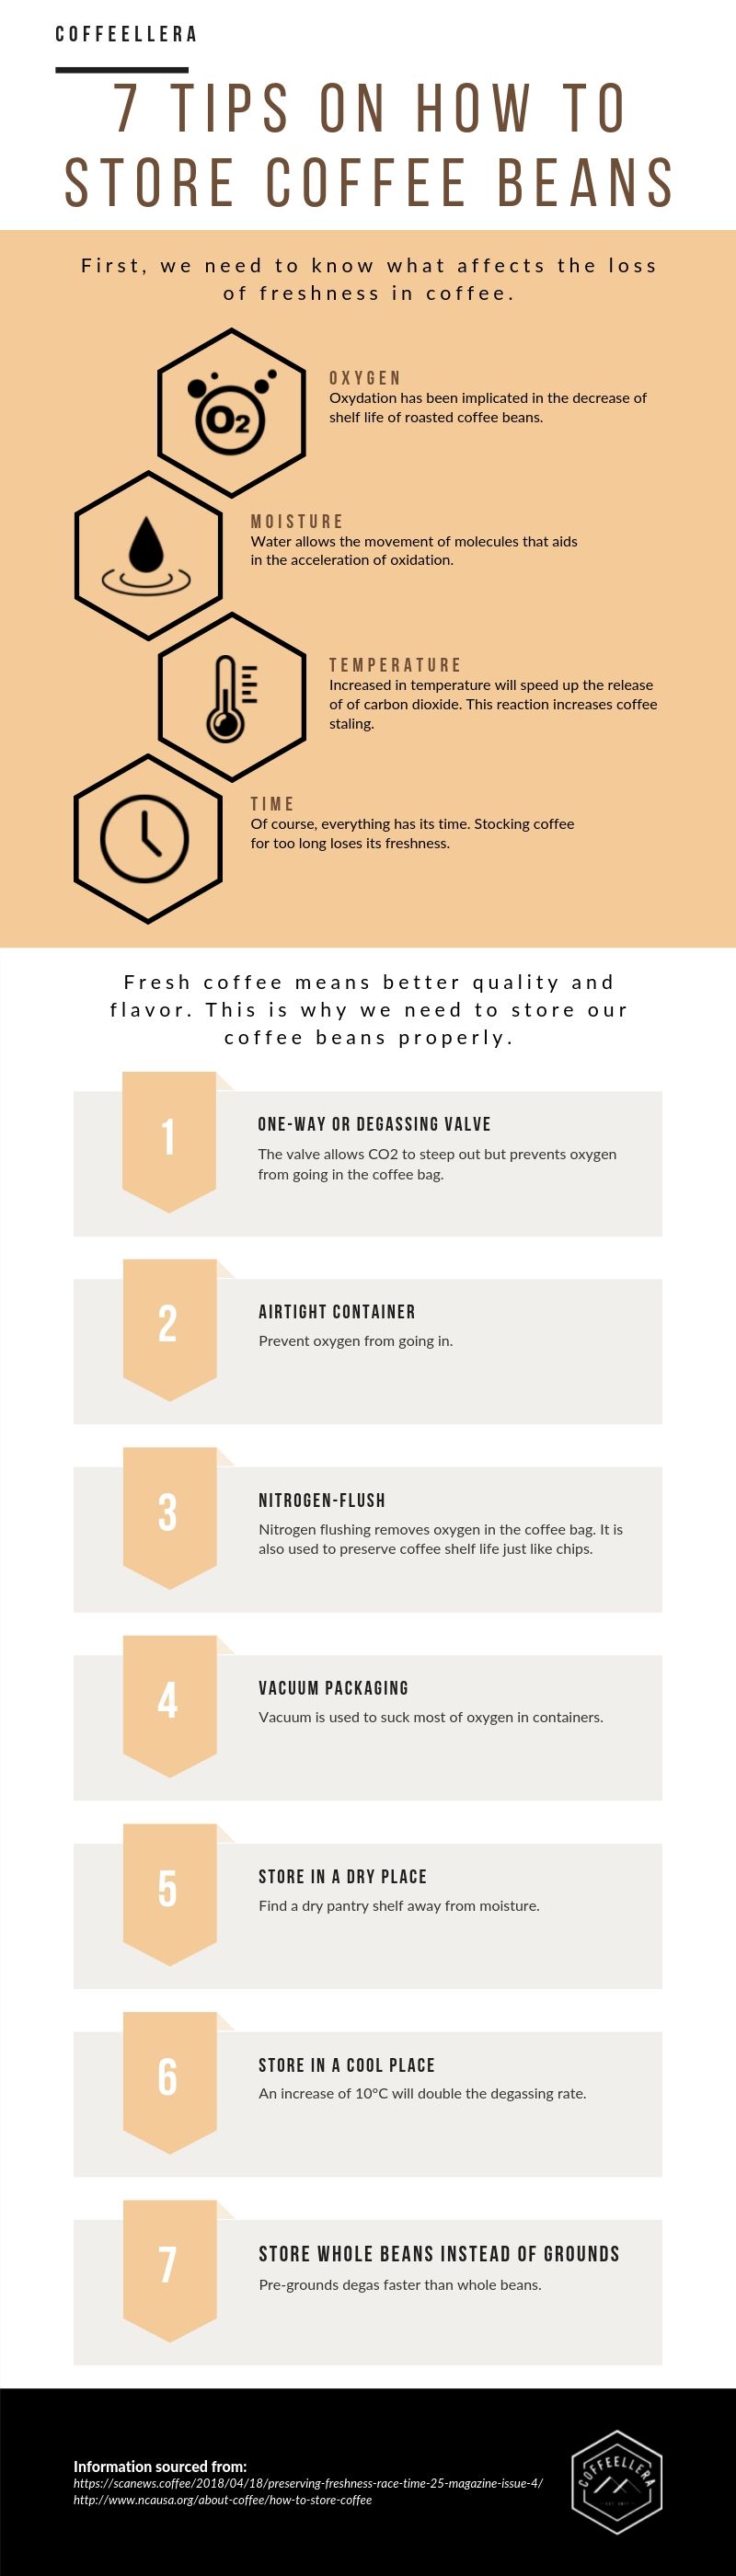 https://www.coffeellera.com/wp-content/uploads/2019/08/how-to-store-coffee-beans.jpg